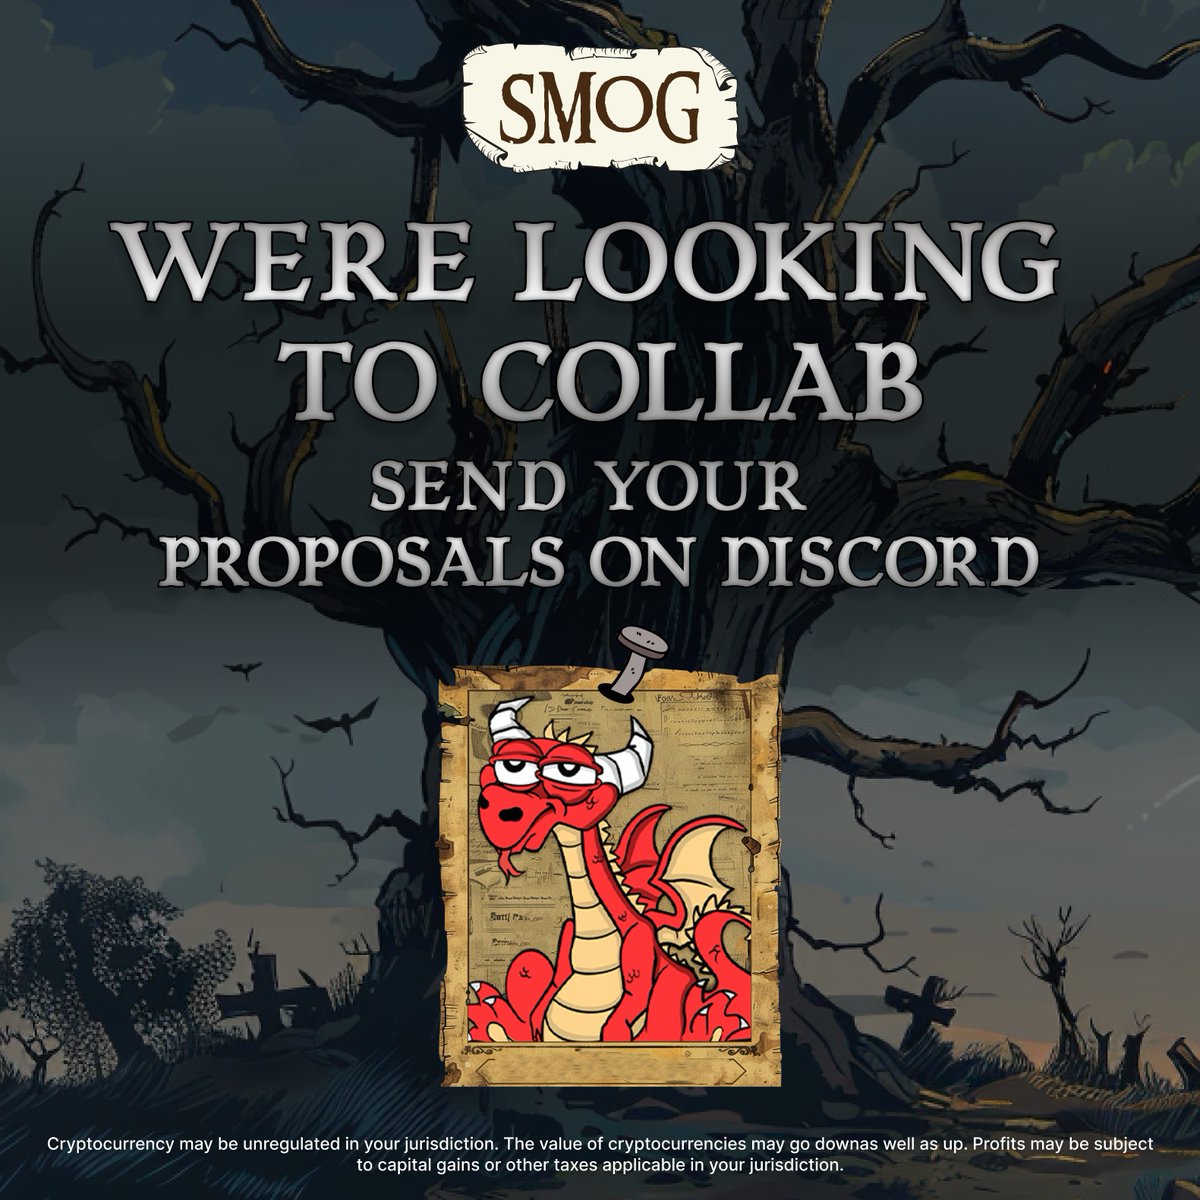 🔥 Calling all #Dragons! 🐉 We've just launched a Discord #SMOG collaboration channel for different communities! 🚀 Got a proposal? 💡 Send it in and let's work together! 🤝 discord.com/invite/WBRBkk9… #SmogSwap #TradeSmog #Solana #Discord